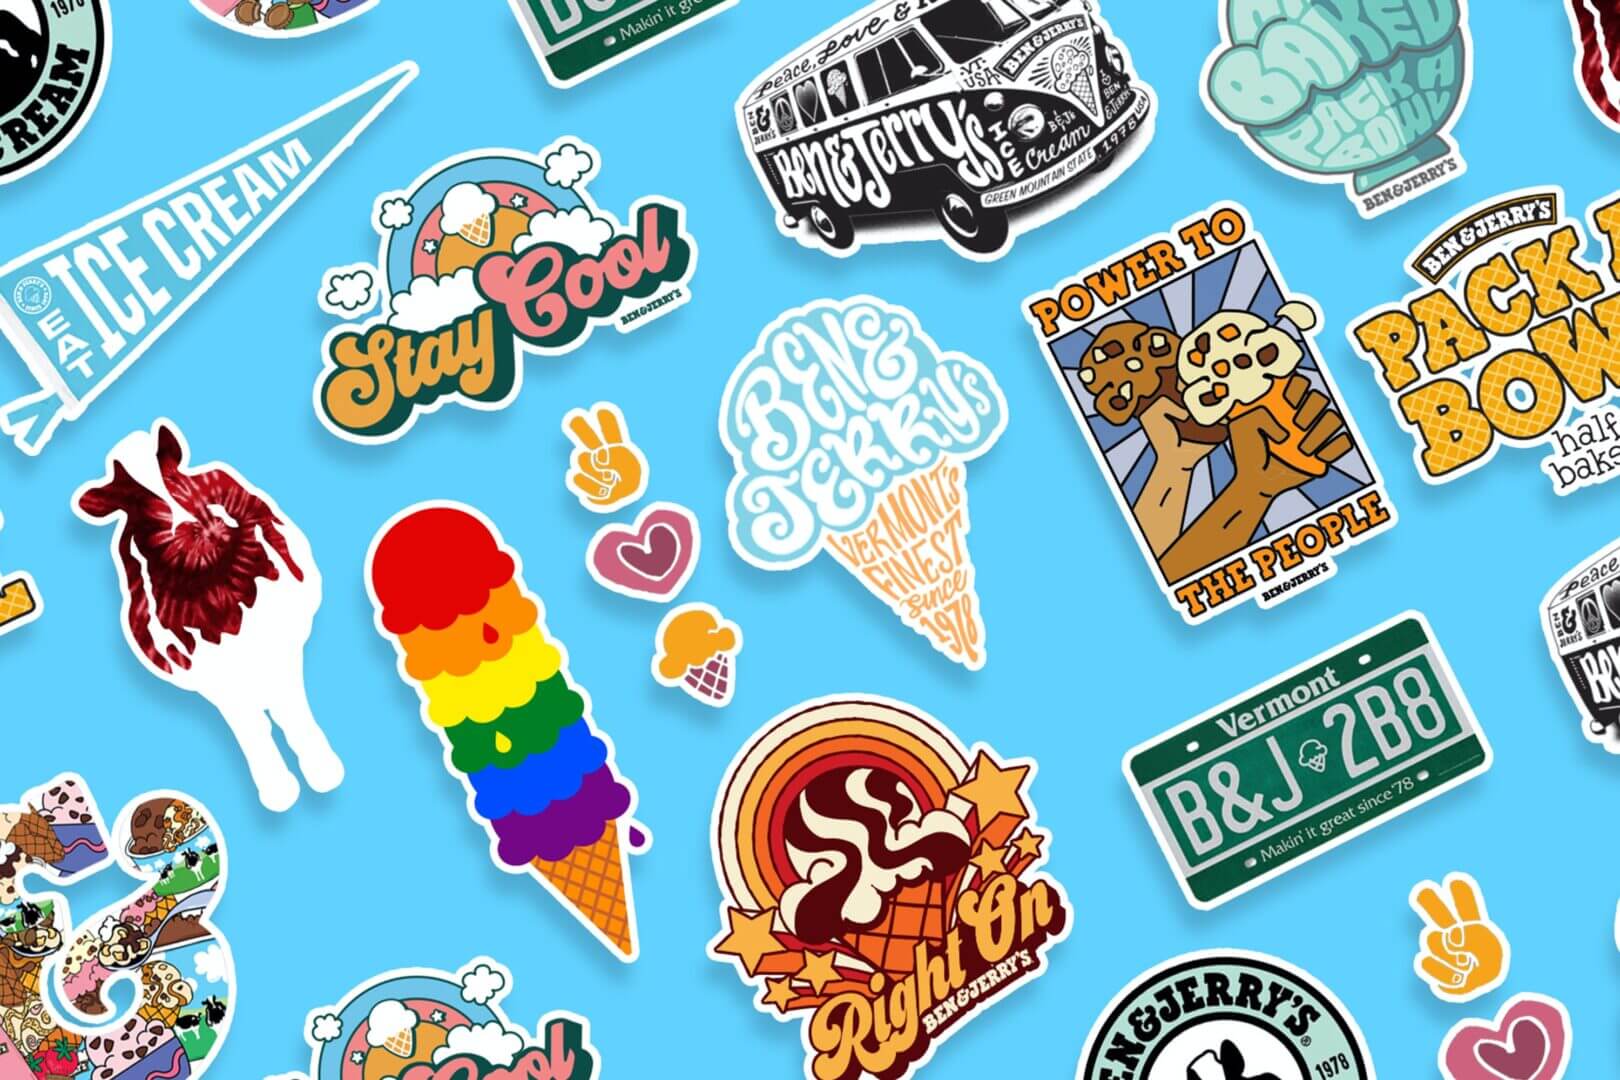 Various colorful stickers of Ben & Jerry's logos